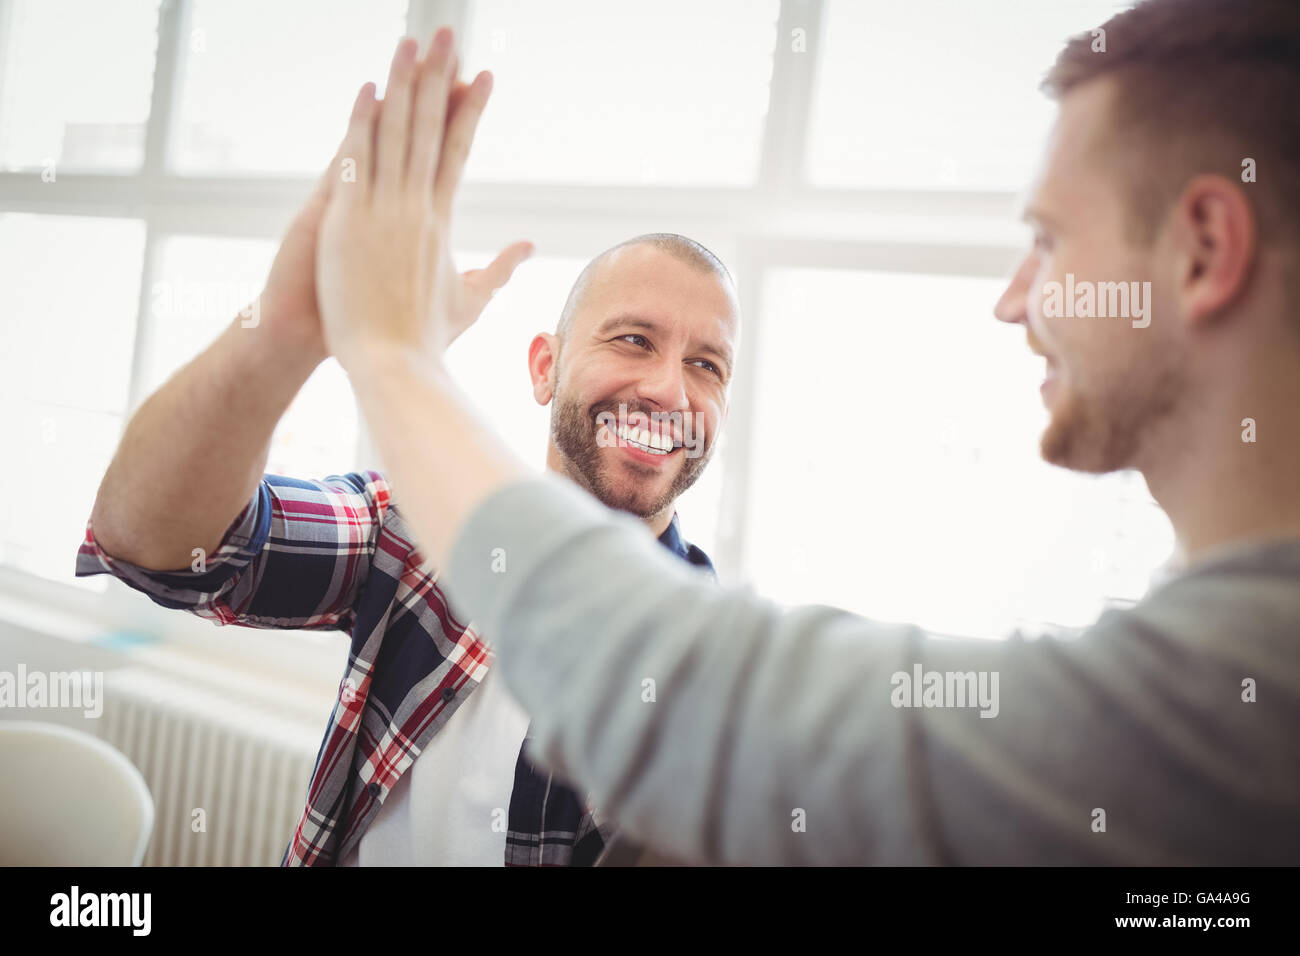 Male coworkers giving high-five Stock Photo